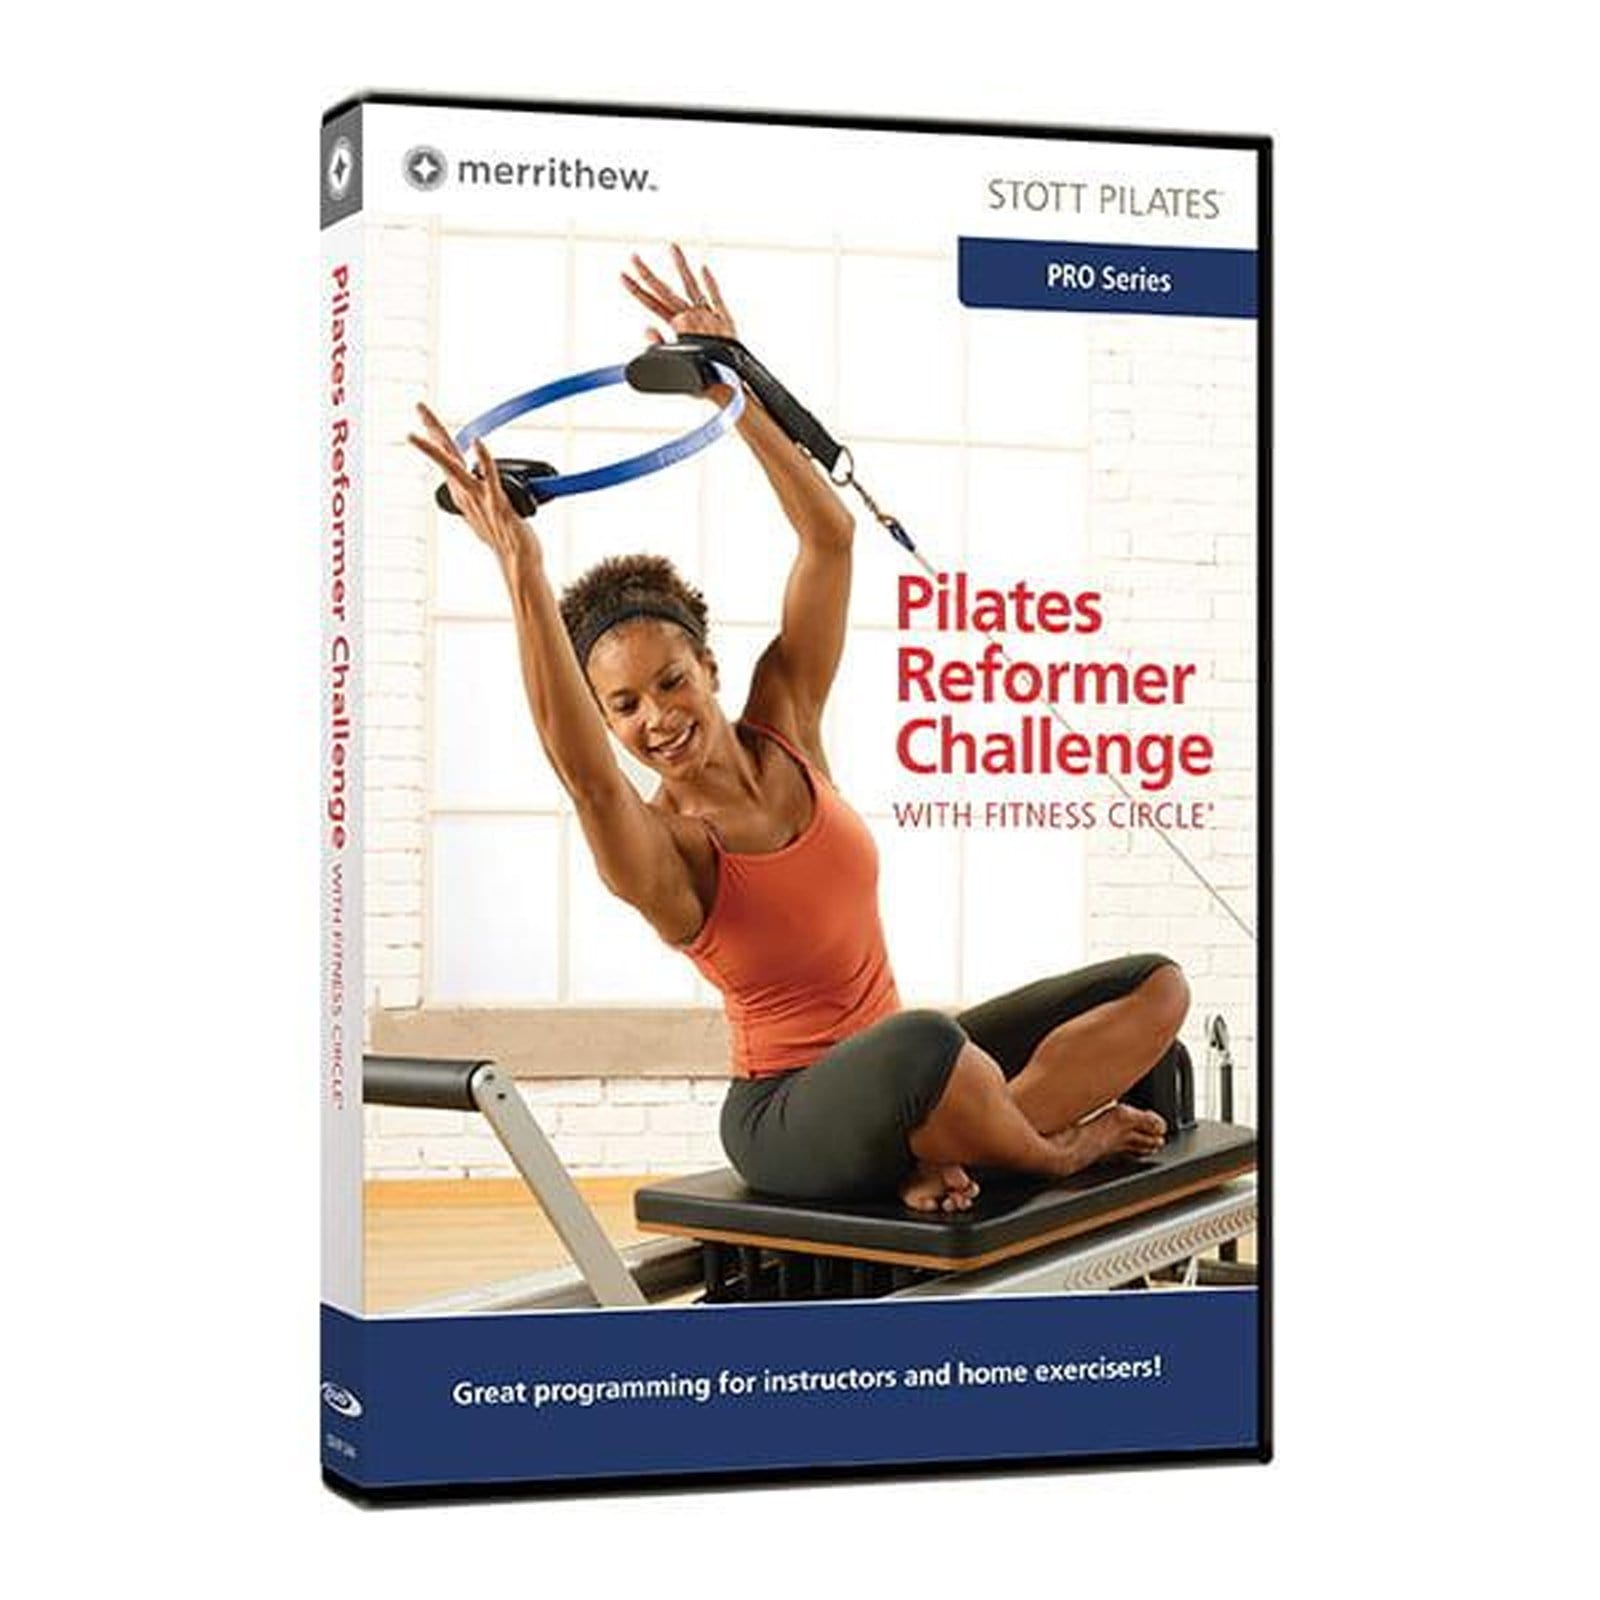 Merrithew Pilates Reformer Challenge with Fitness Circle DVD